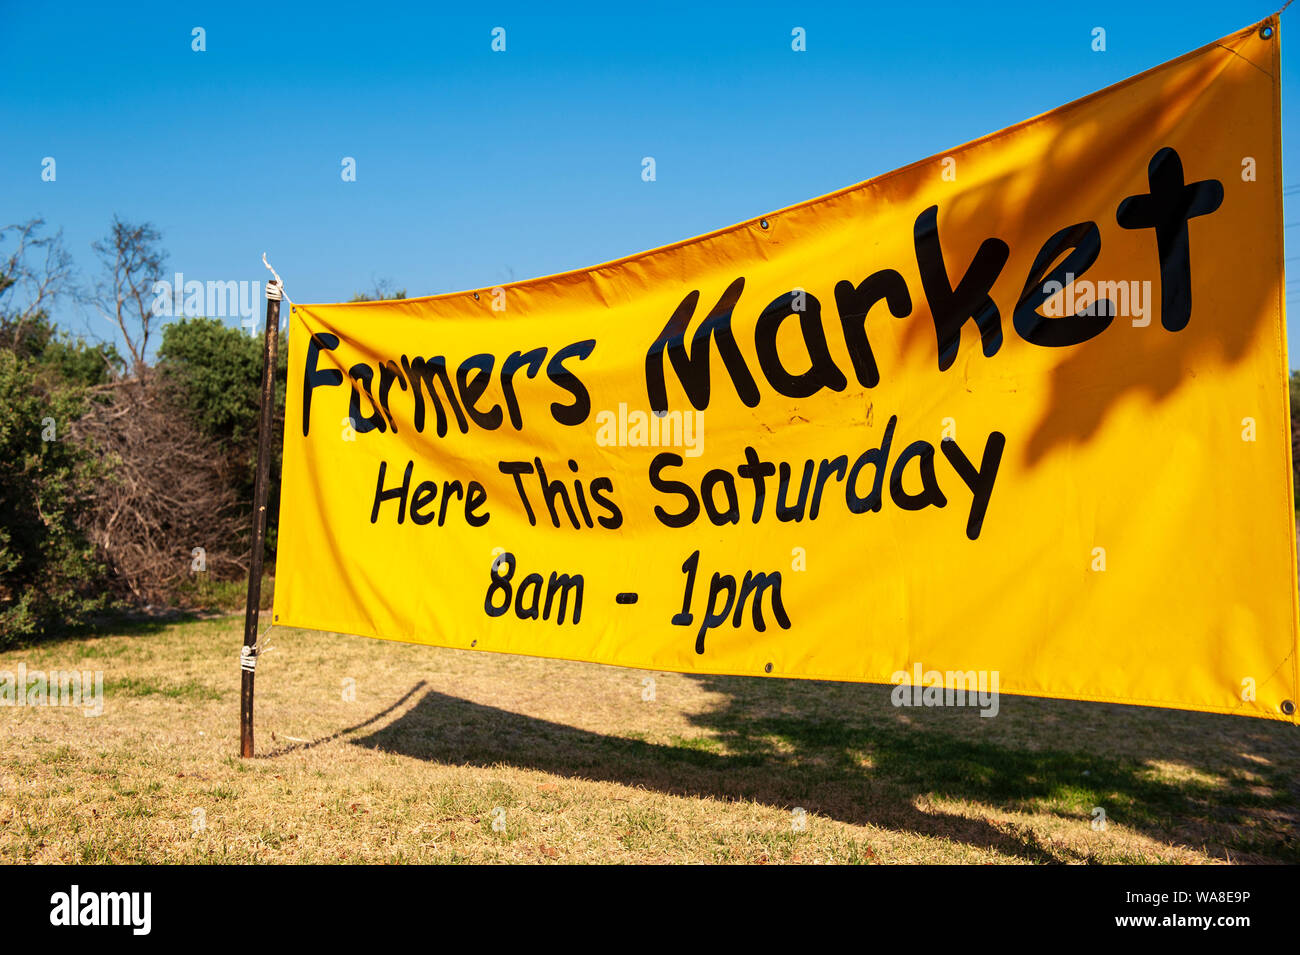 Sign for farmers market on Saturday on bright yellow background with blue sky, Australia Stock Photo